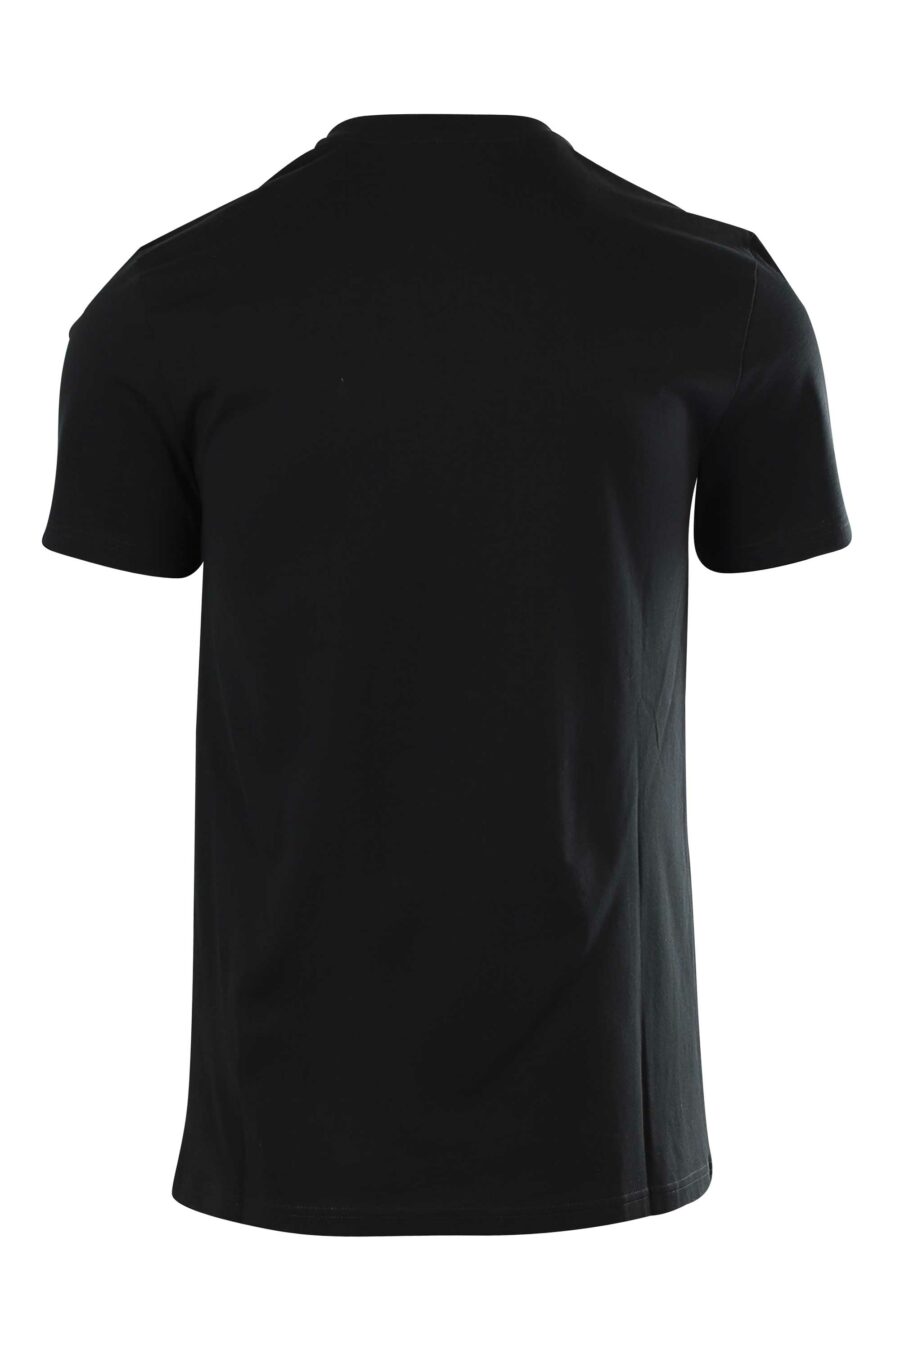 Black T-shirt with white double question maxilogo - 667112832334 2